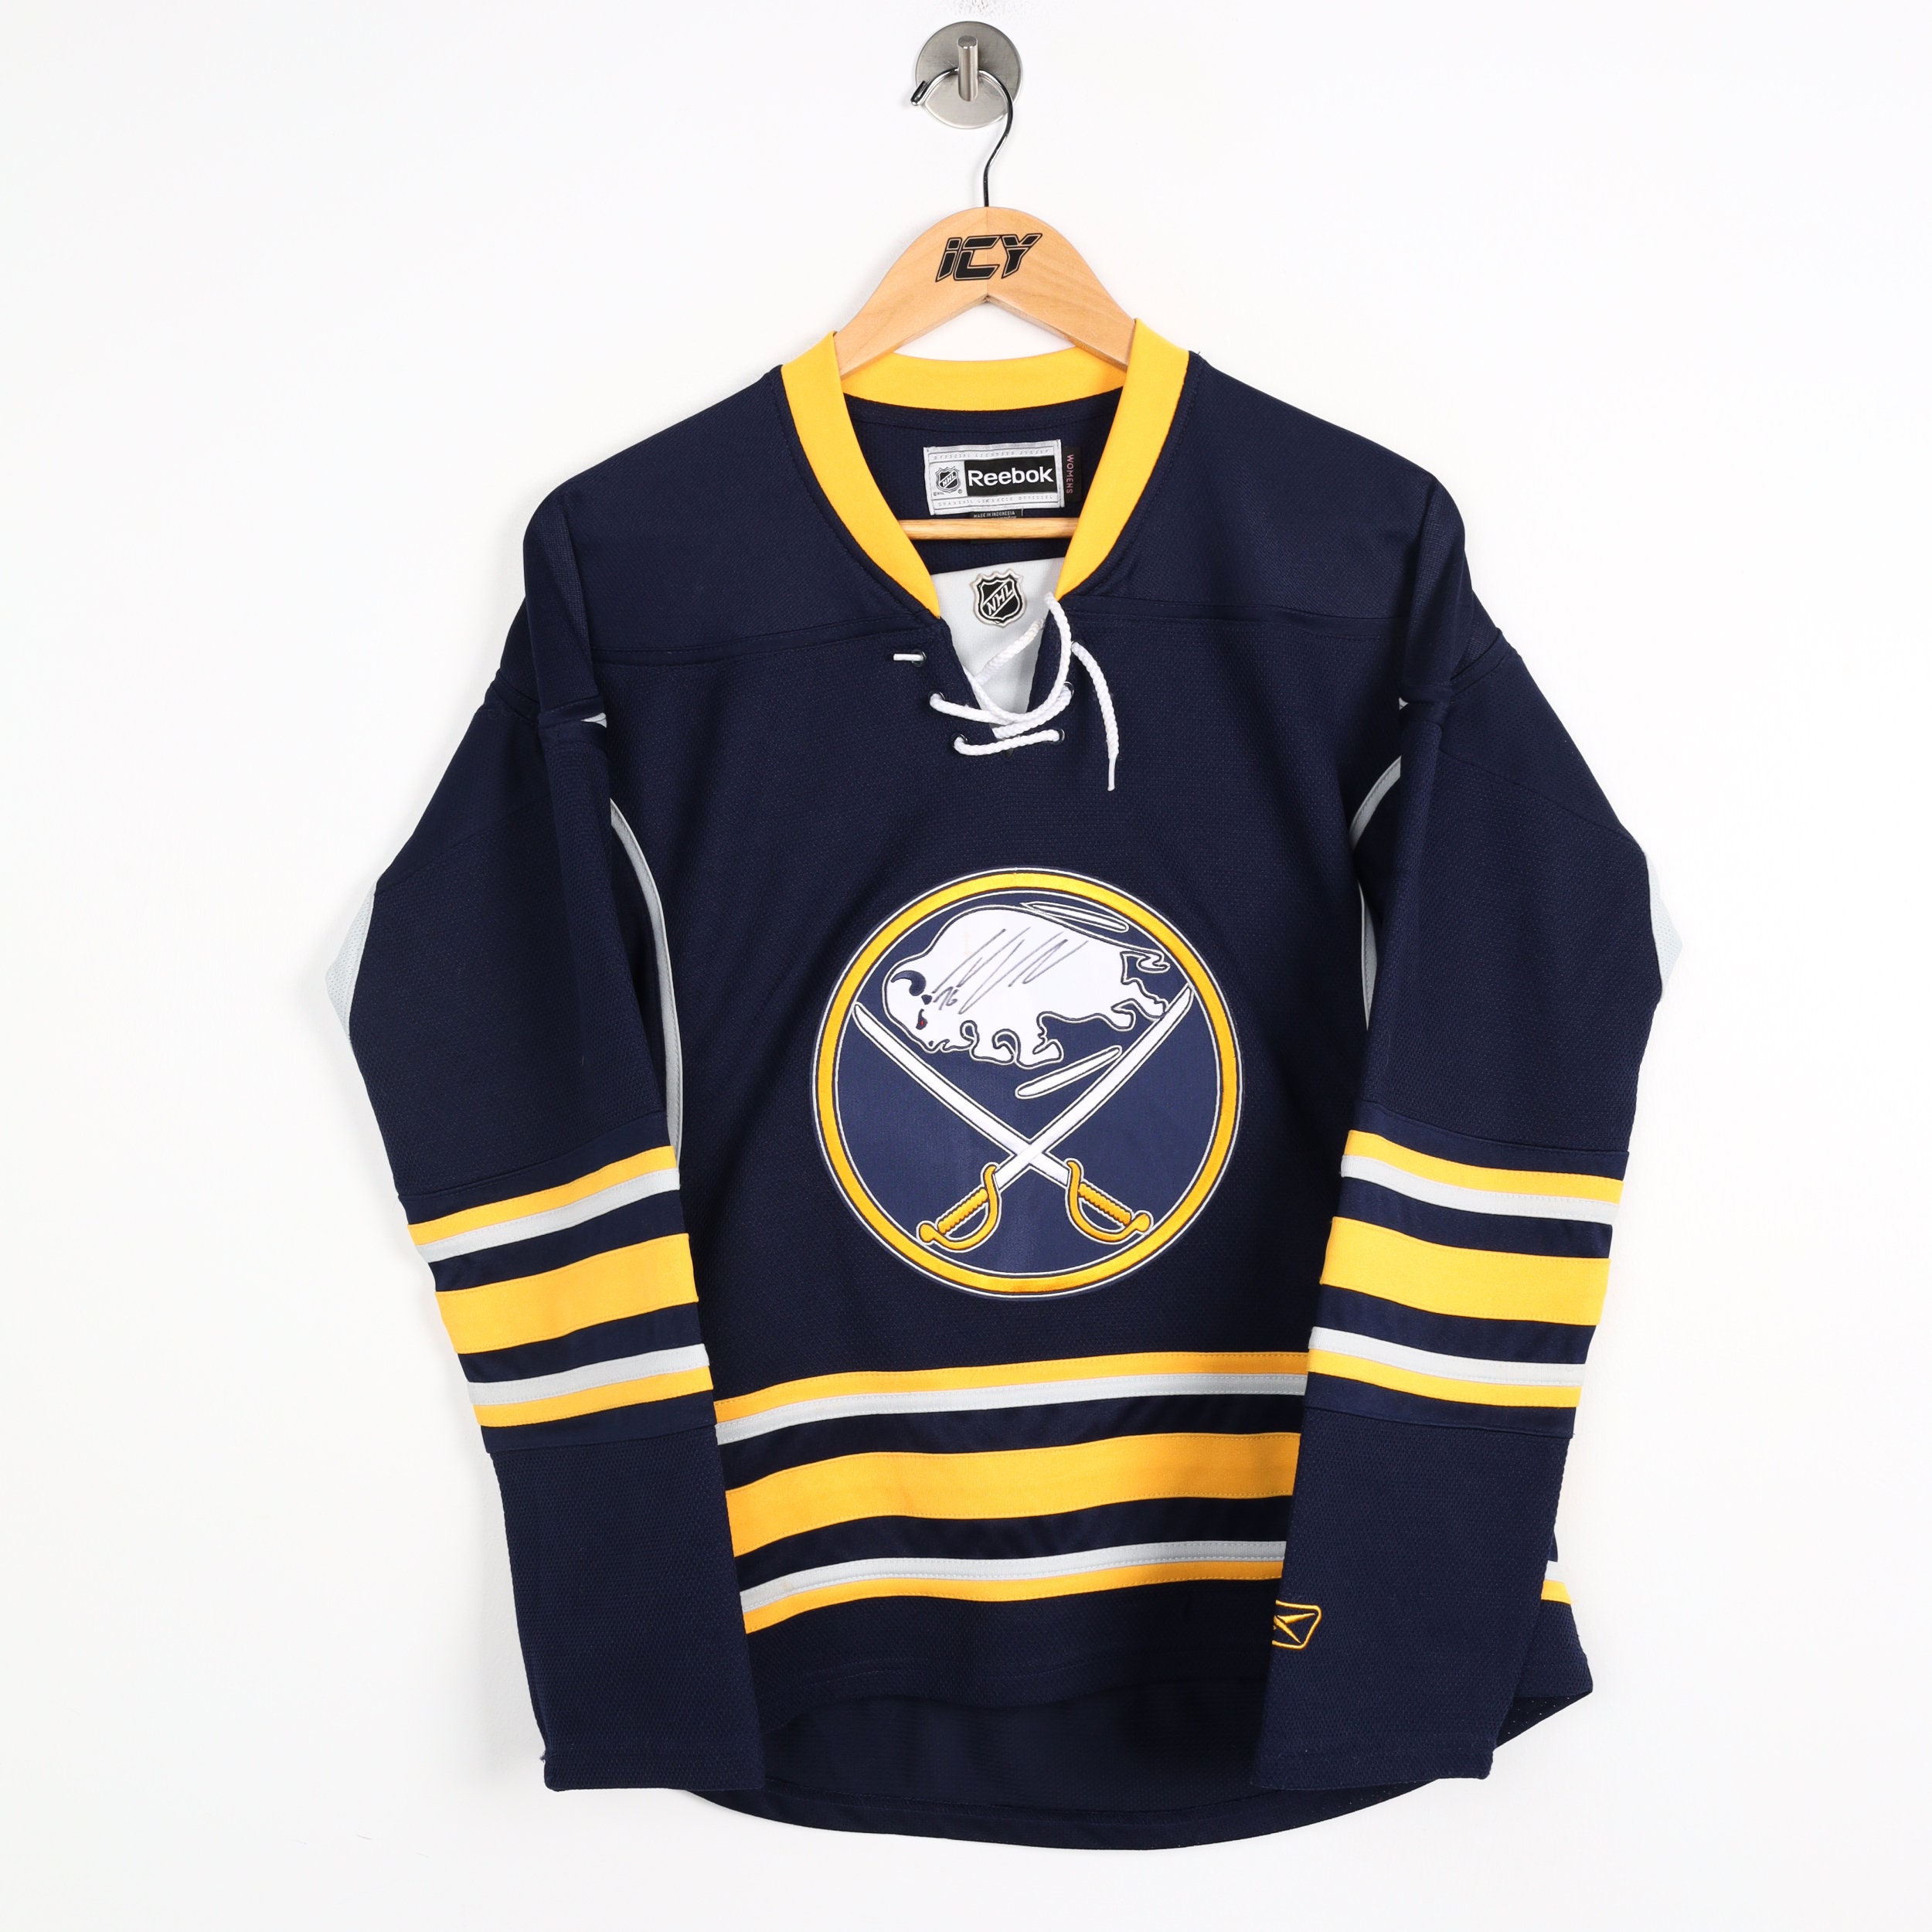 Where should I buy an authentic jersey? : r/sabres